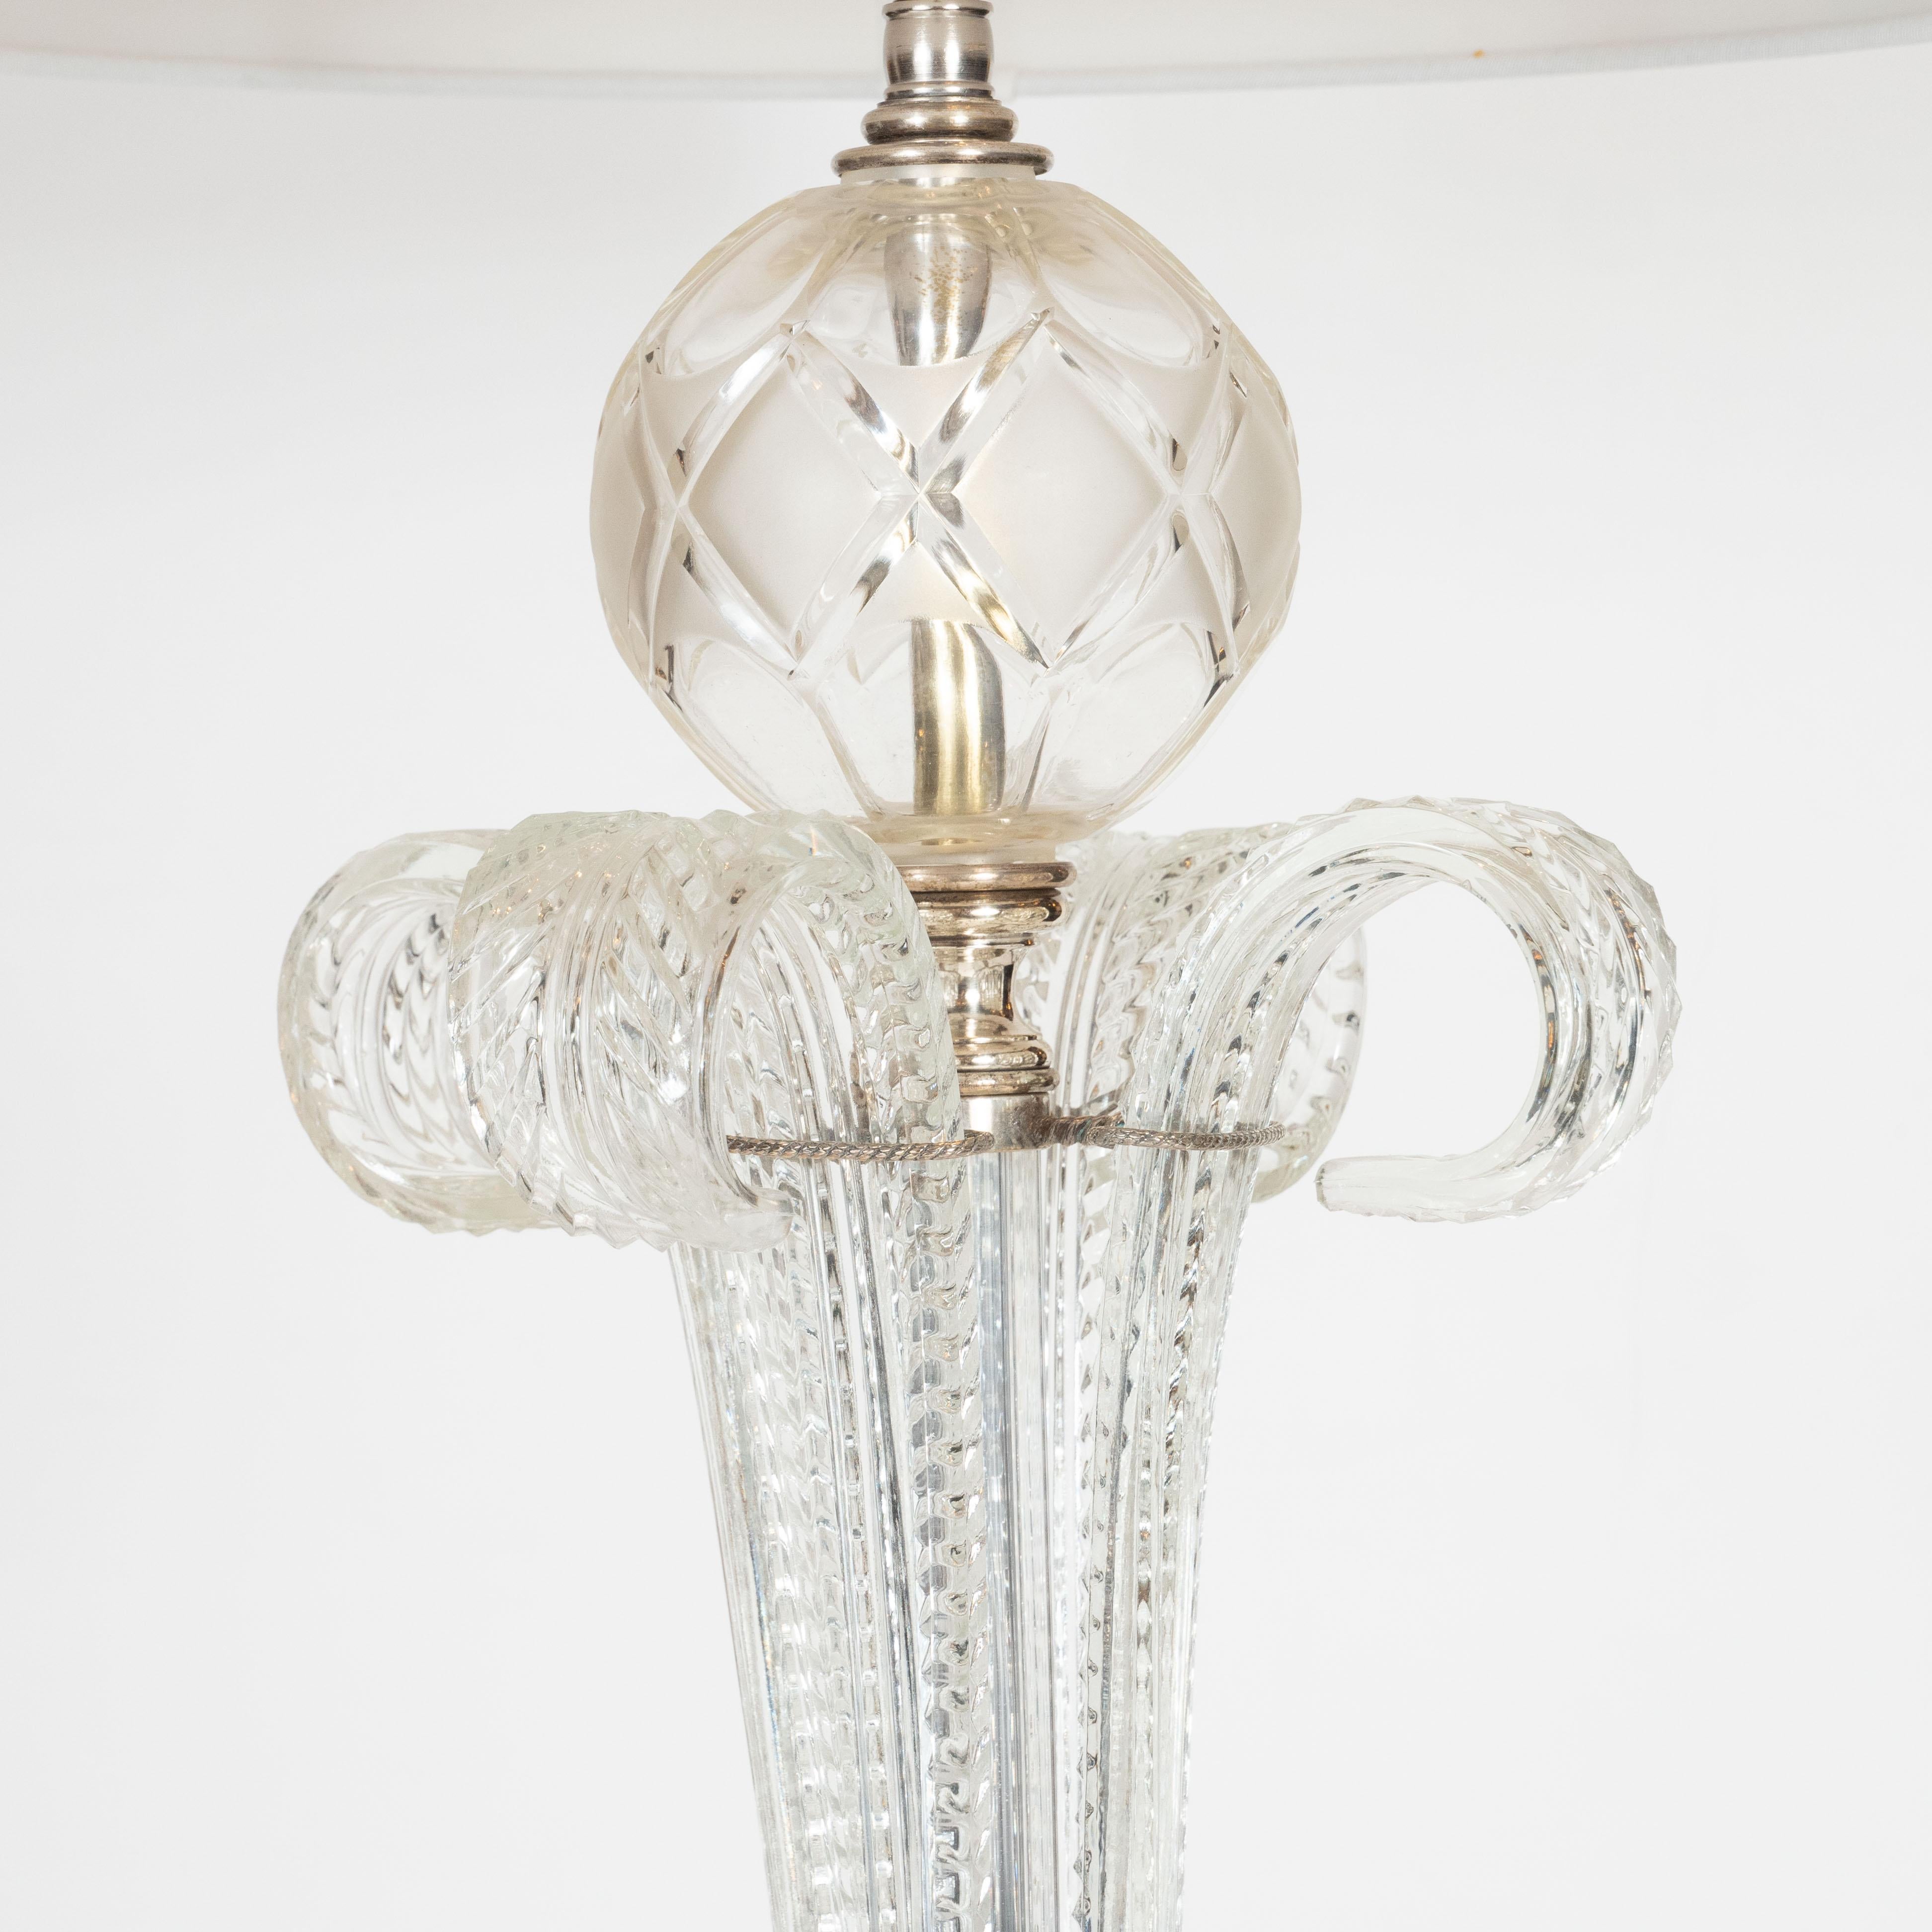 American 1940s Hollywood Regency Translucent Cut Crystal Table Lamp with Acanthus Details For Sale